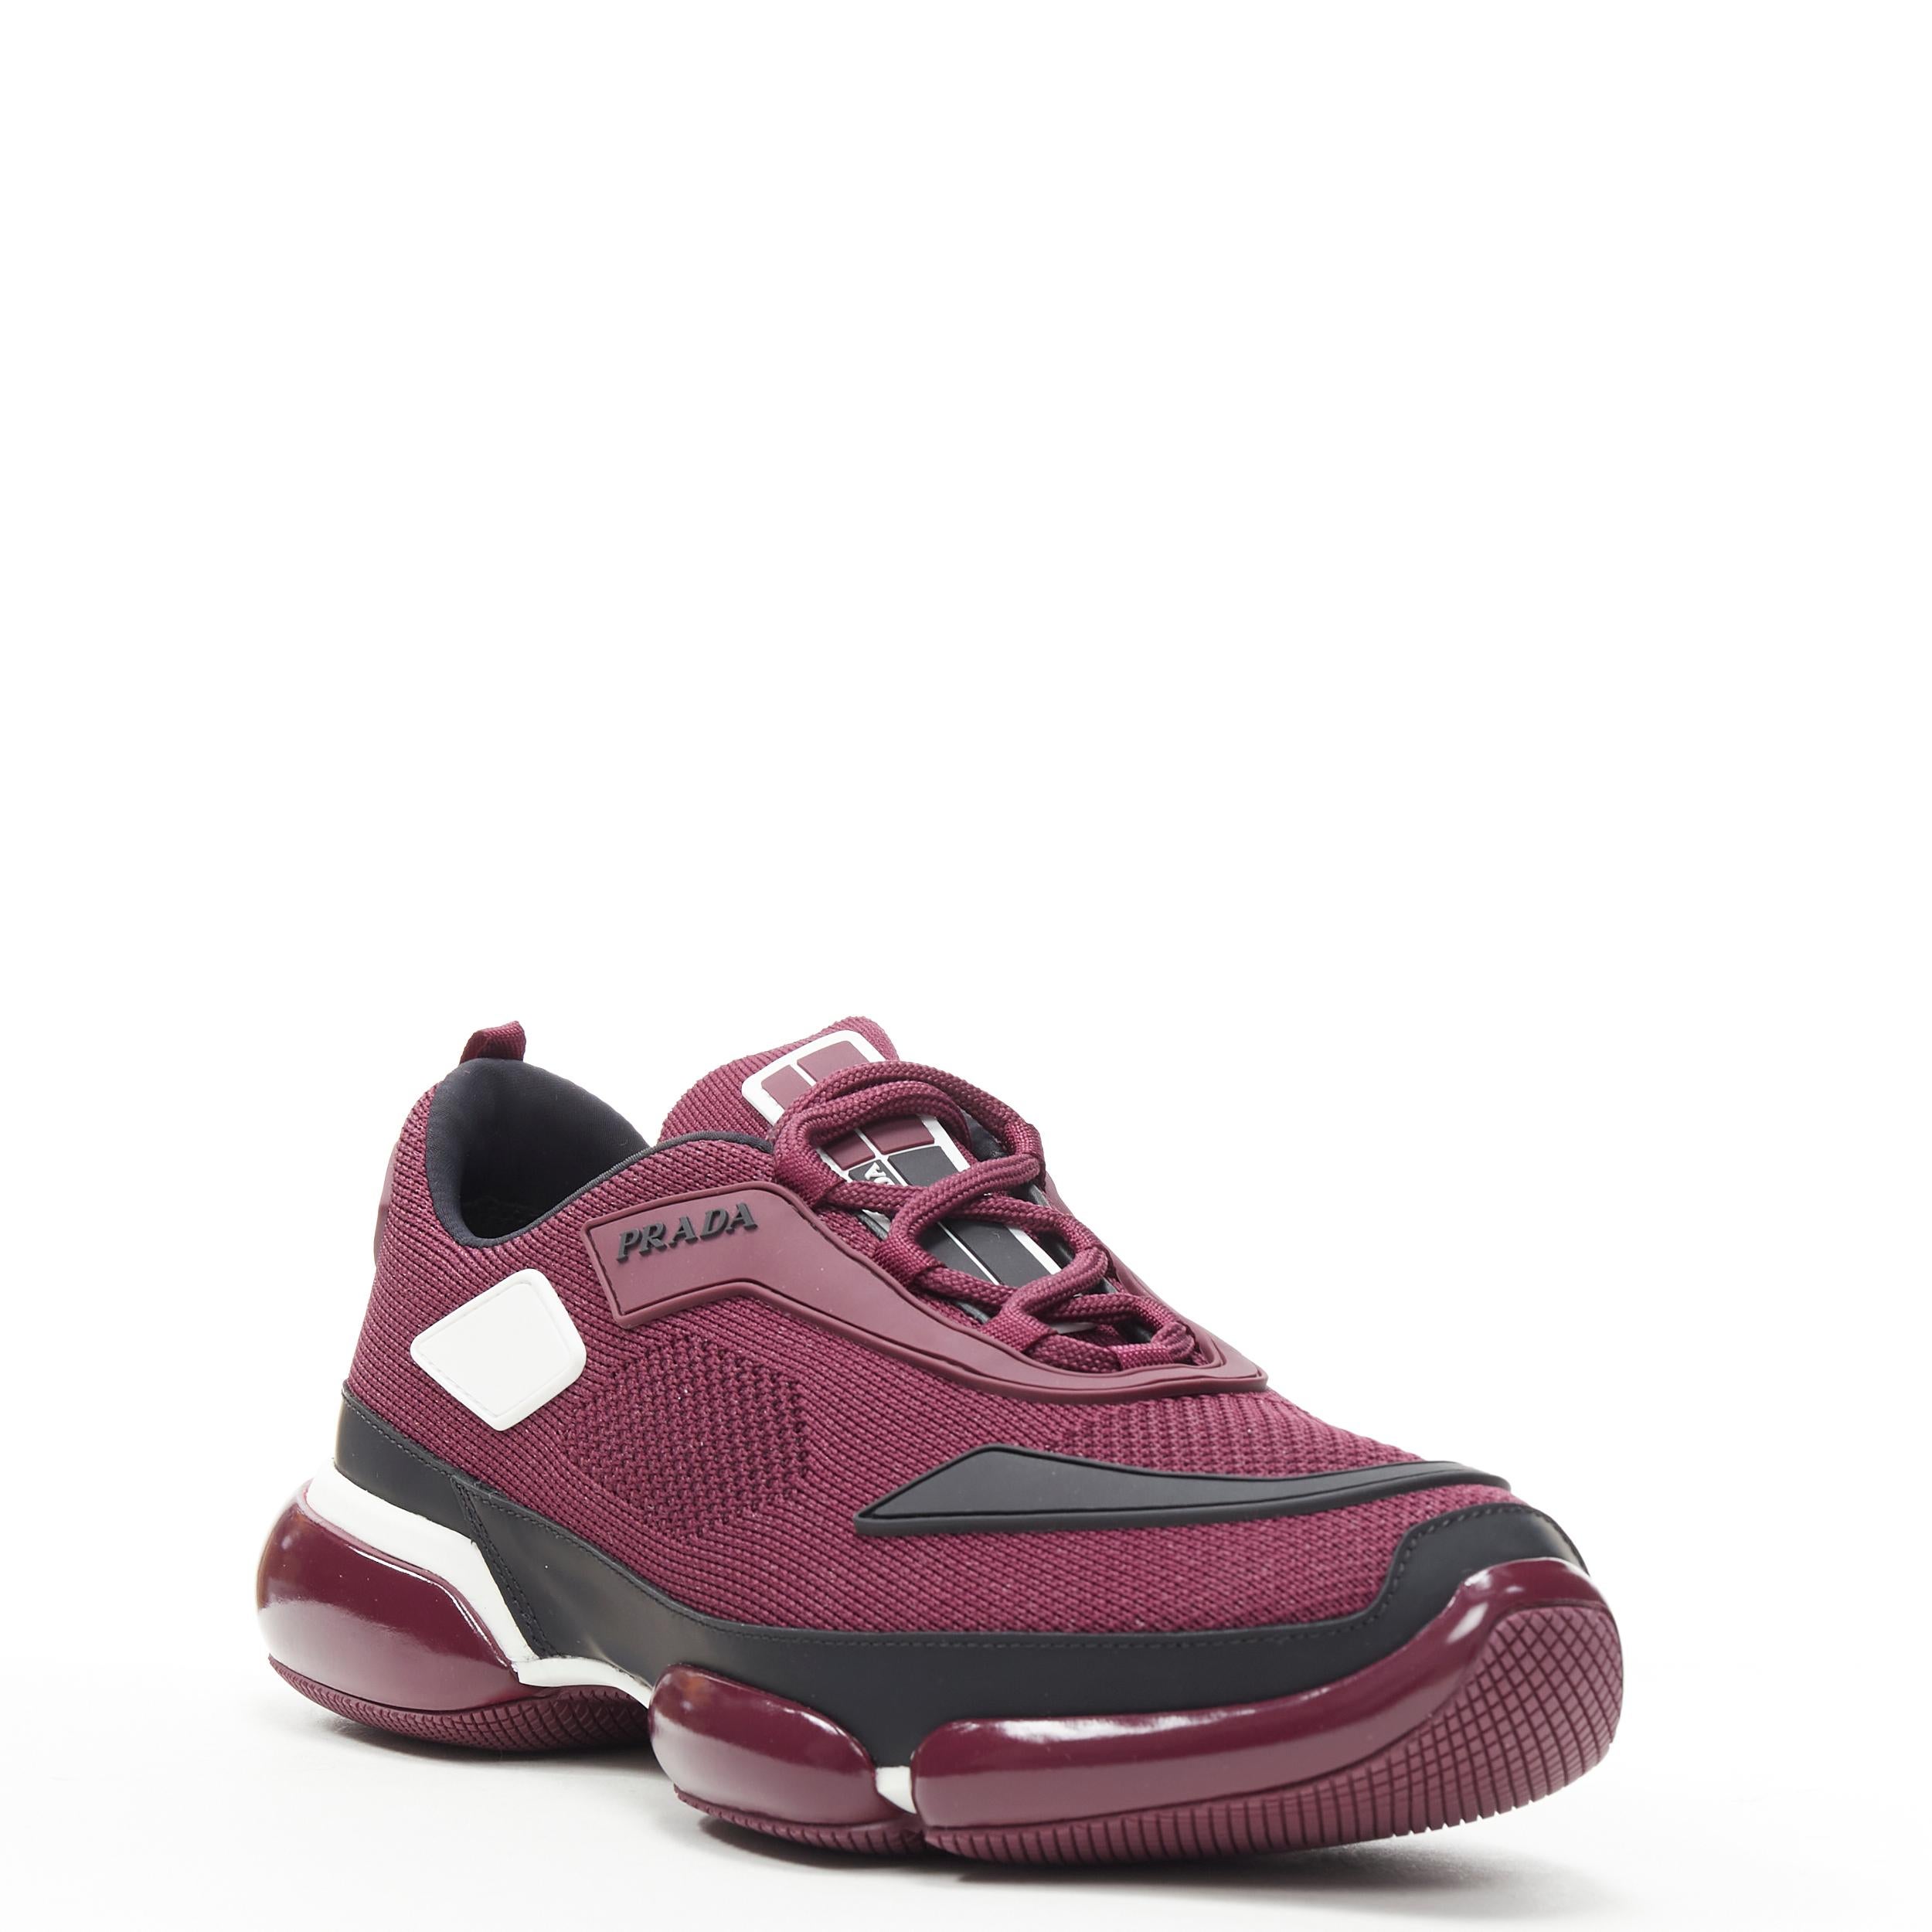 new PRADA 2018 Cloudbust burgundy red rubber logo low top sneaker UK6 EU40 US7
Reference: TGAS/B00942
Brand: Prada
Designer: Miuccia Prada
Model: Cloudbust Burgundy
Collection: 2018
Material: Fabric, Rubber
Color: Burgundy
Pattern: Solid
Closure: